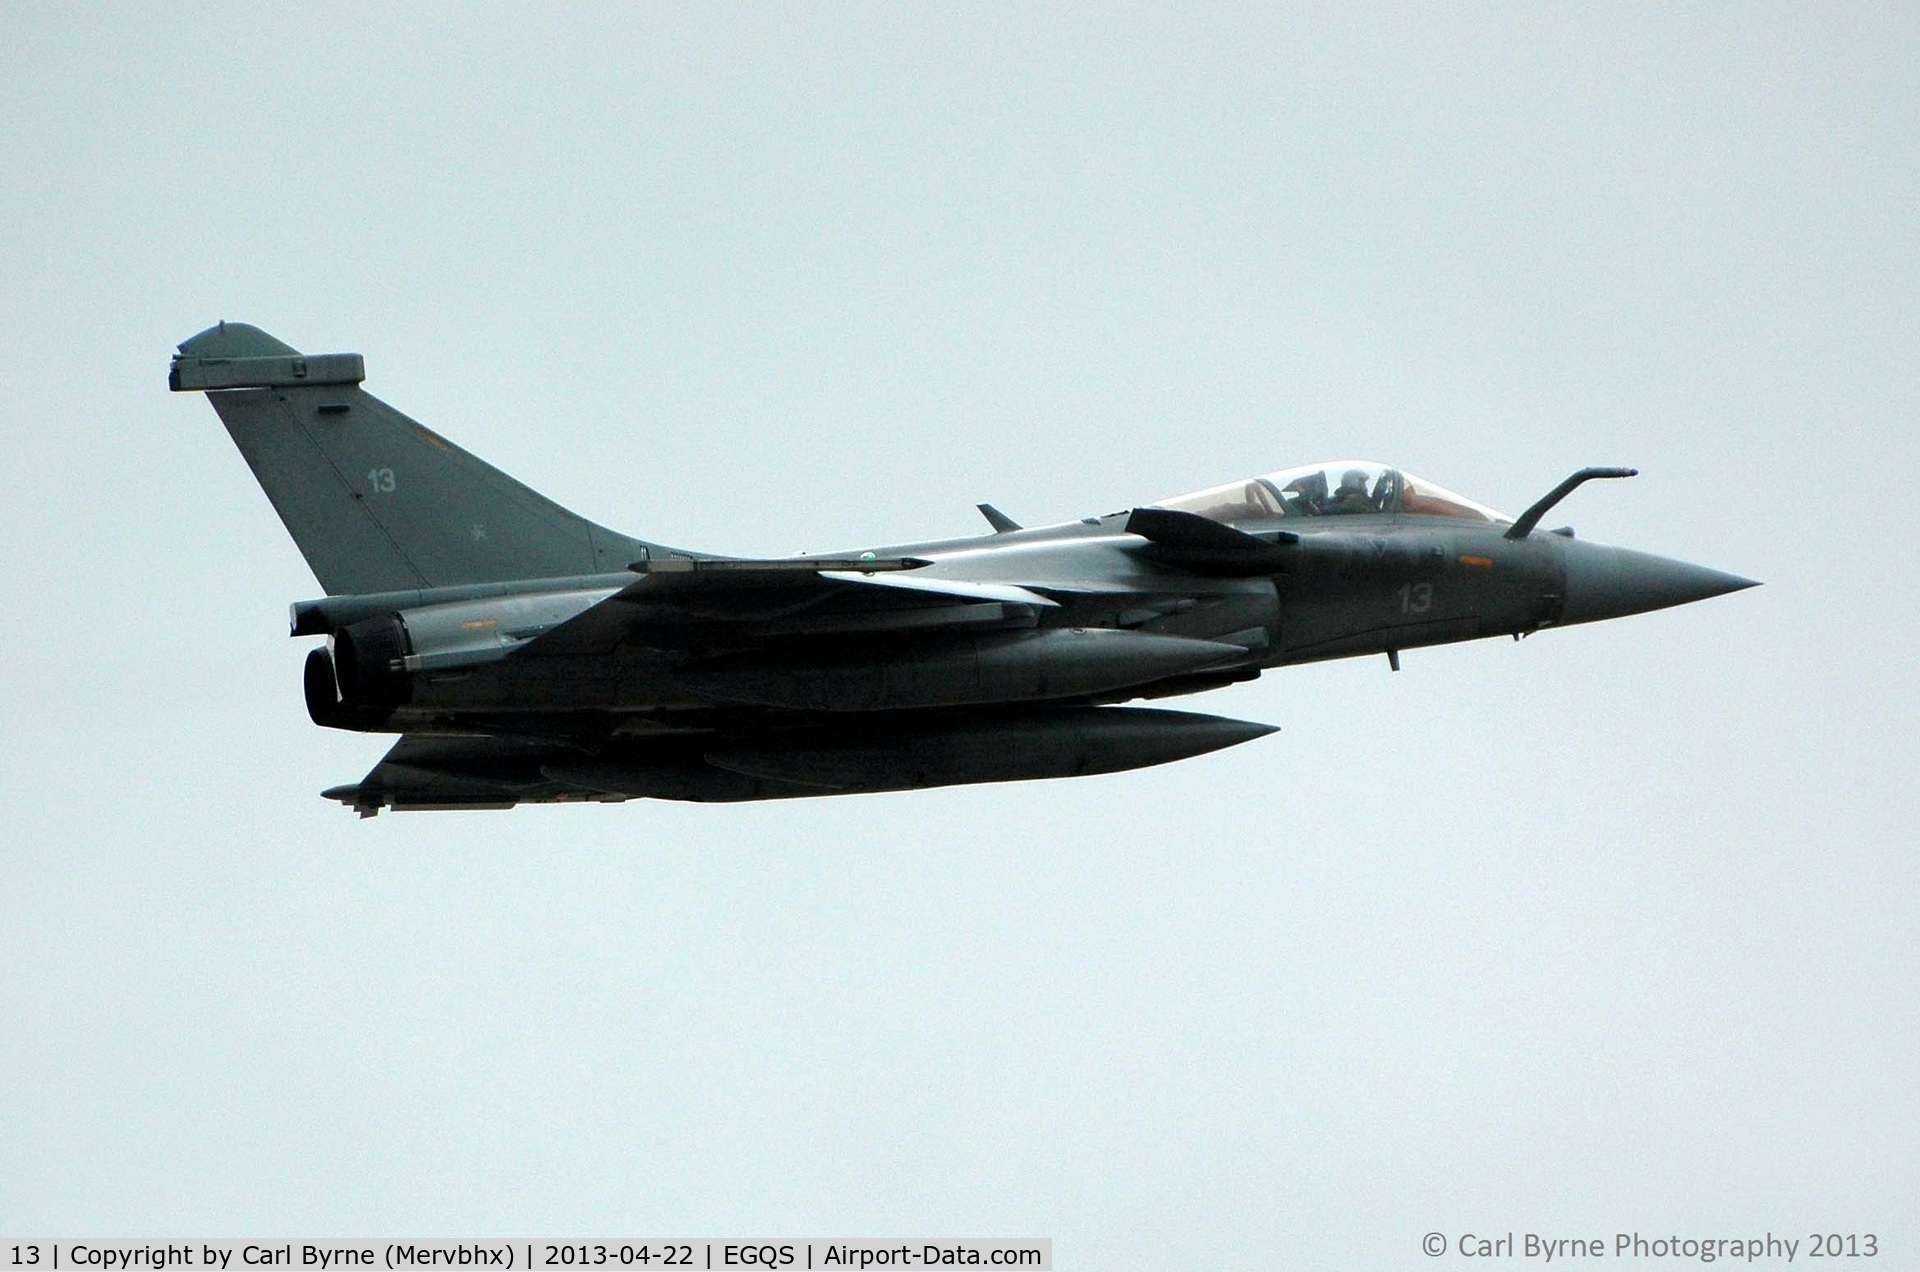 13, Dassault Rafale M C/N 13, Operating as part of the Joint Warrior exercise.